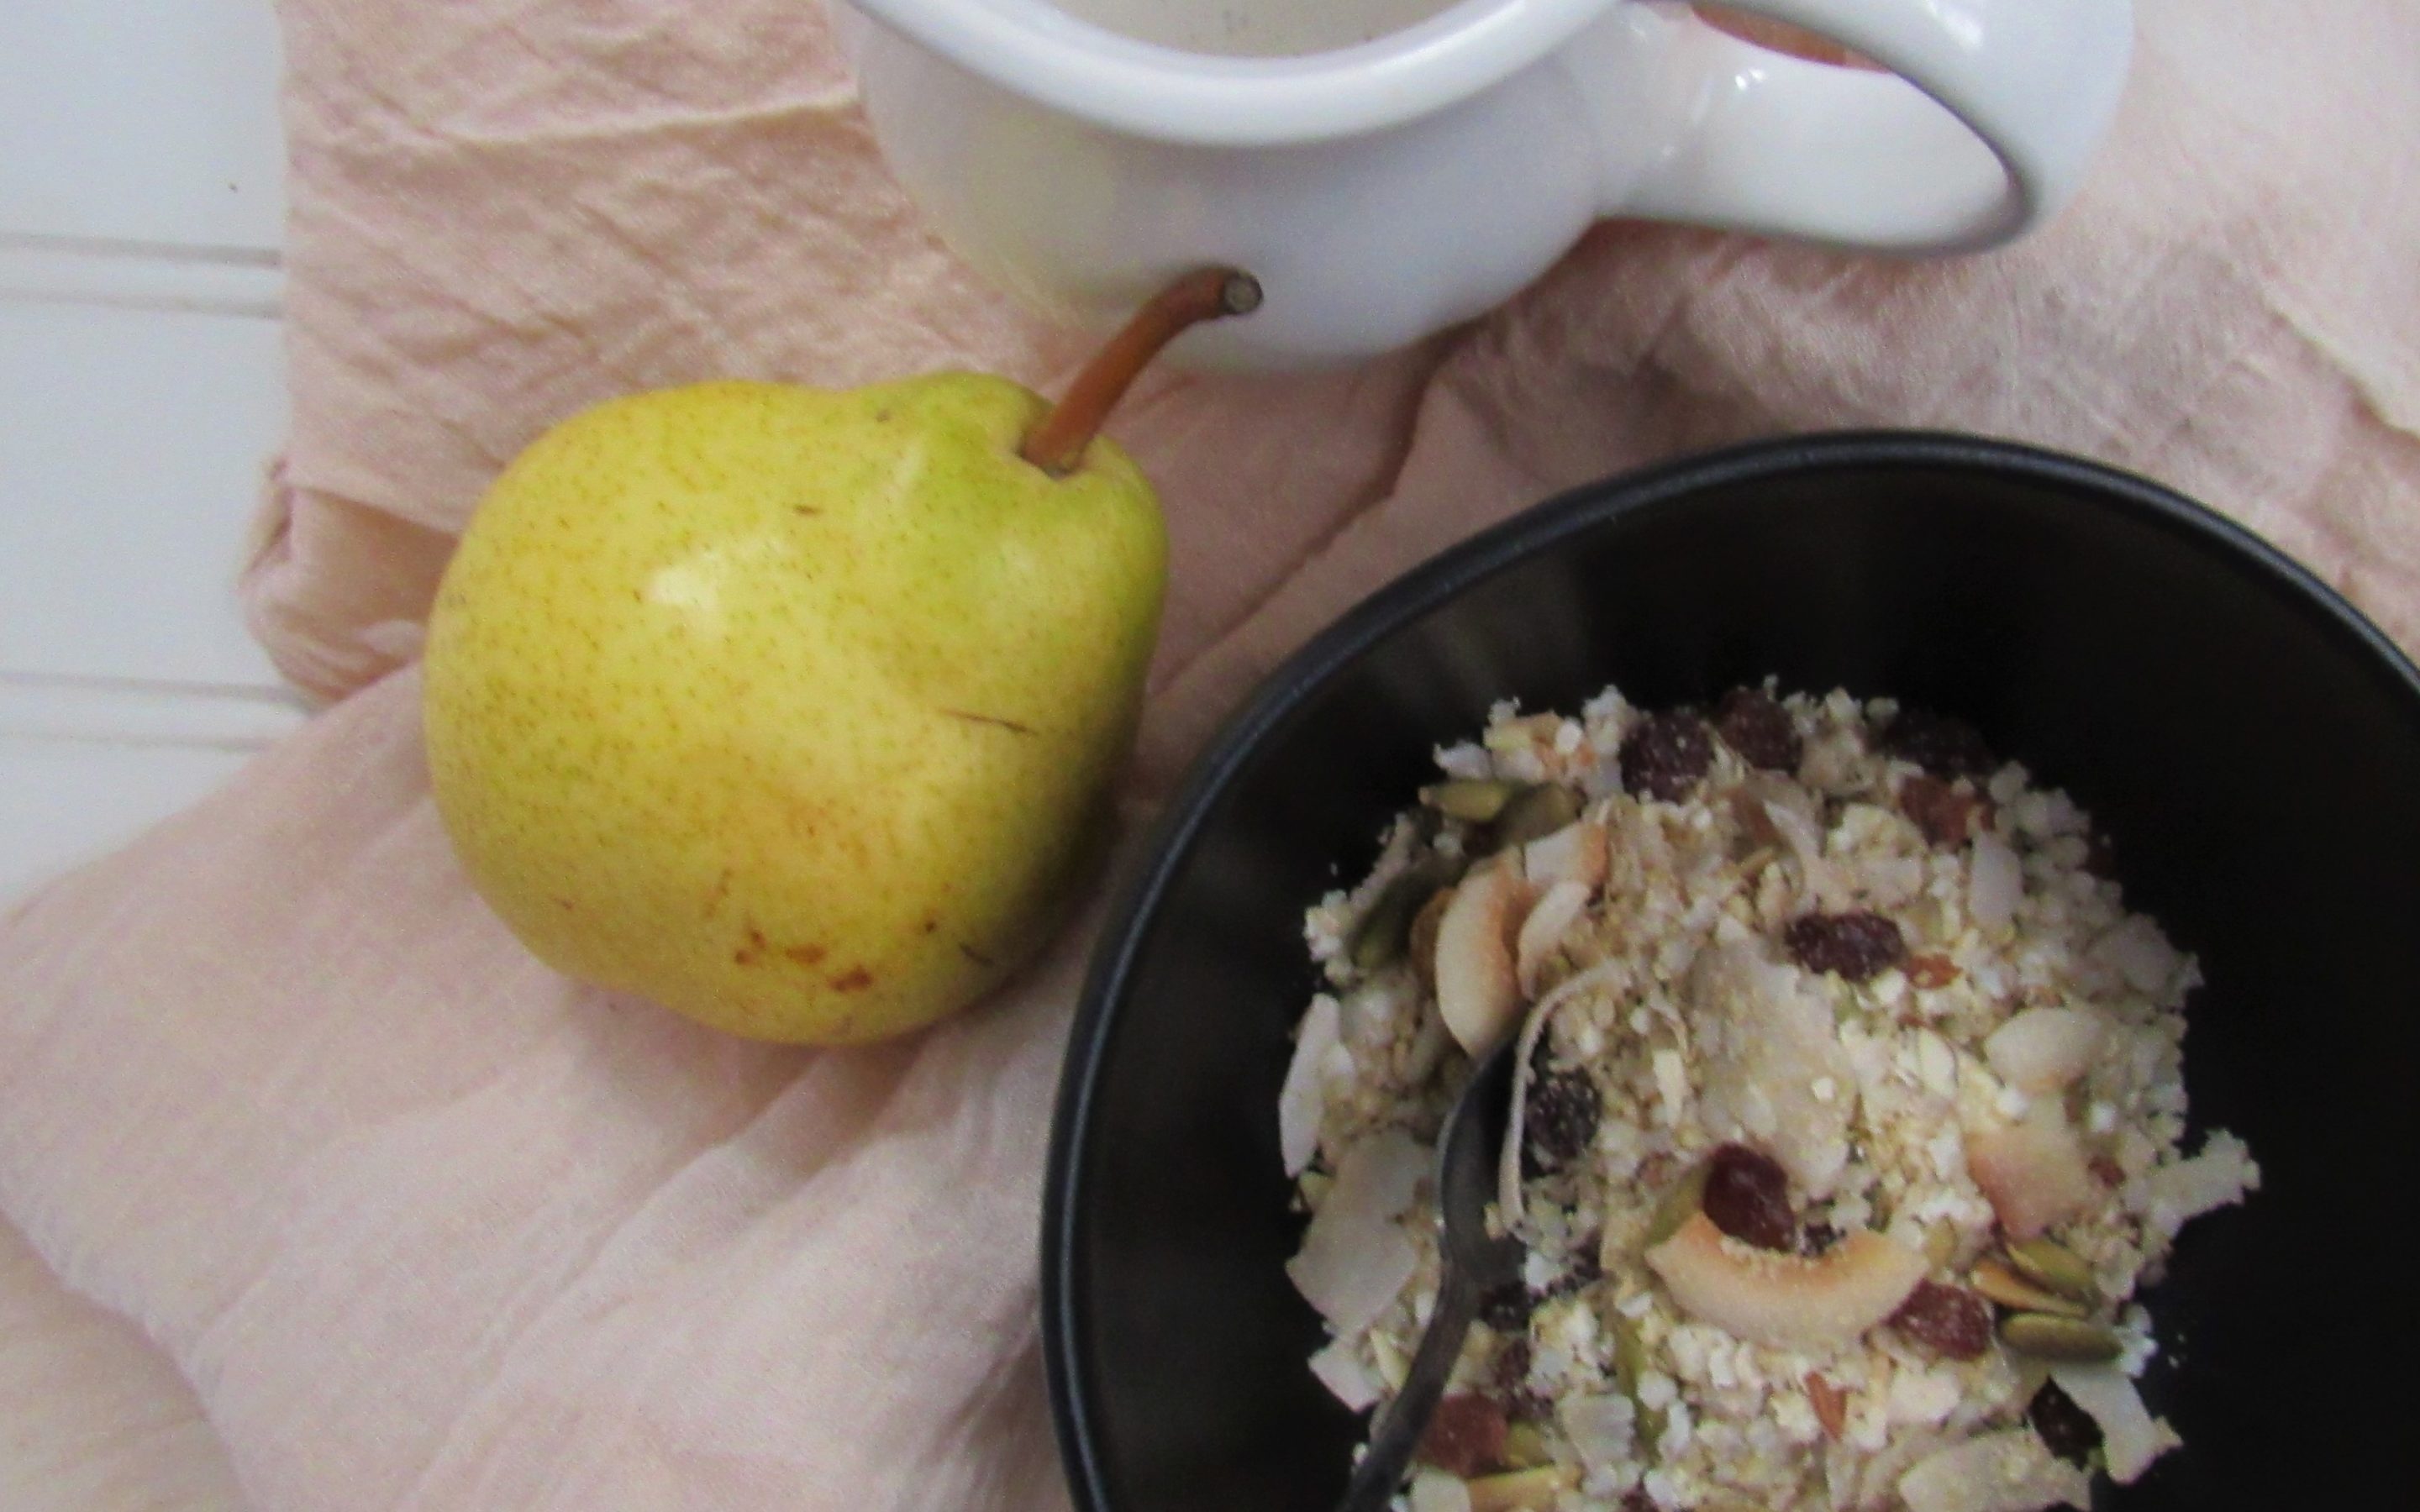 a pear and fruit breakfast bowl on table